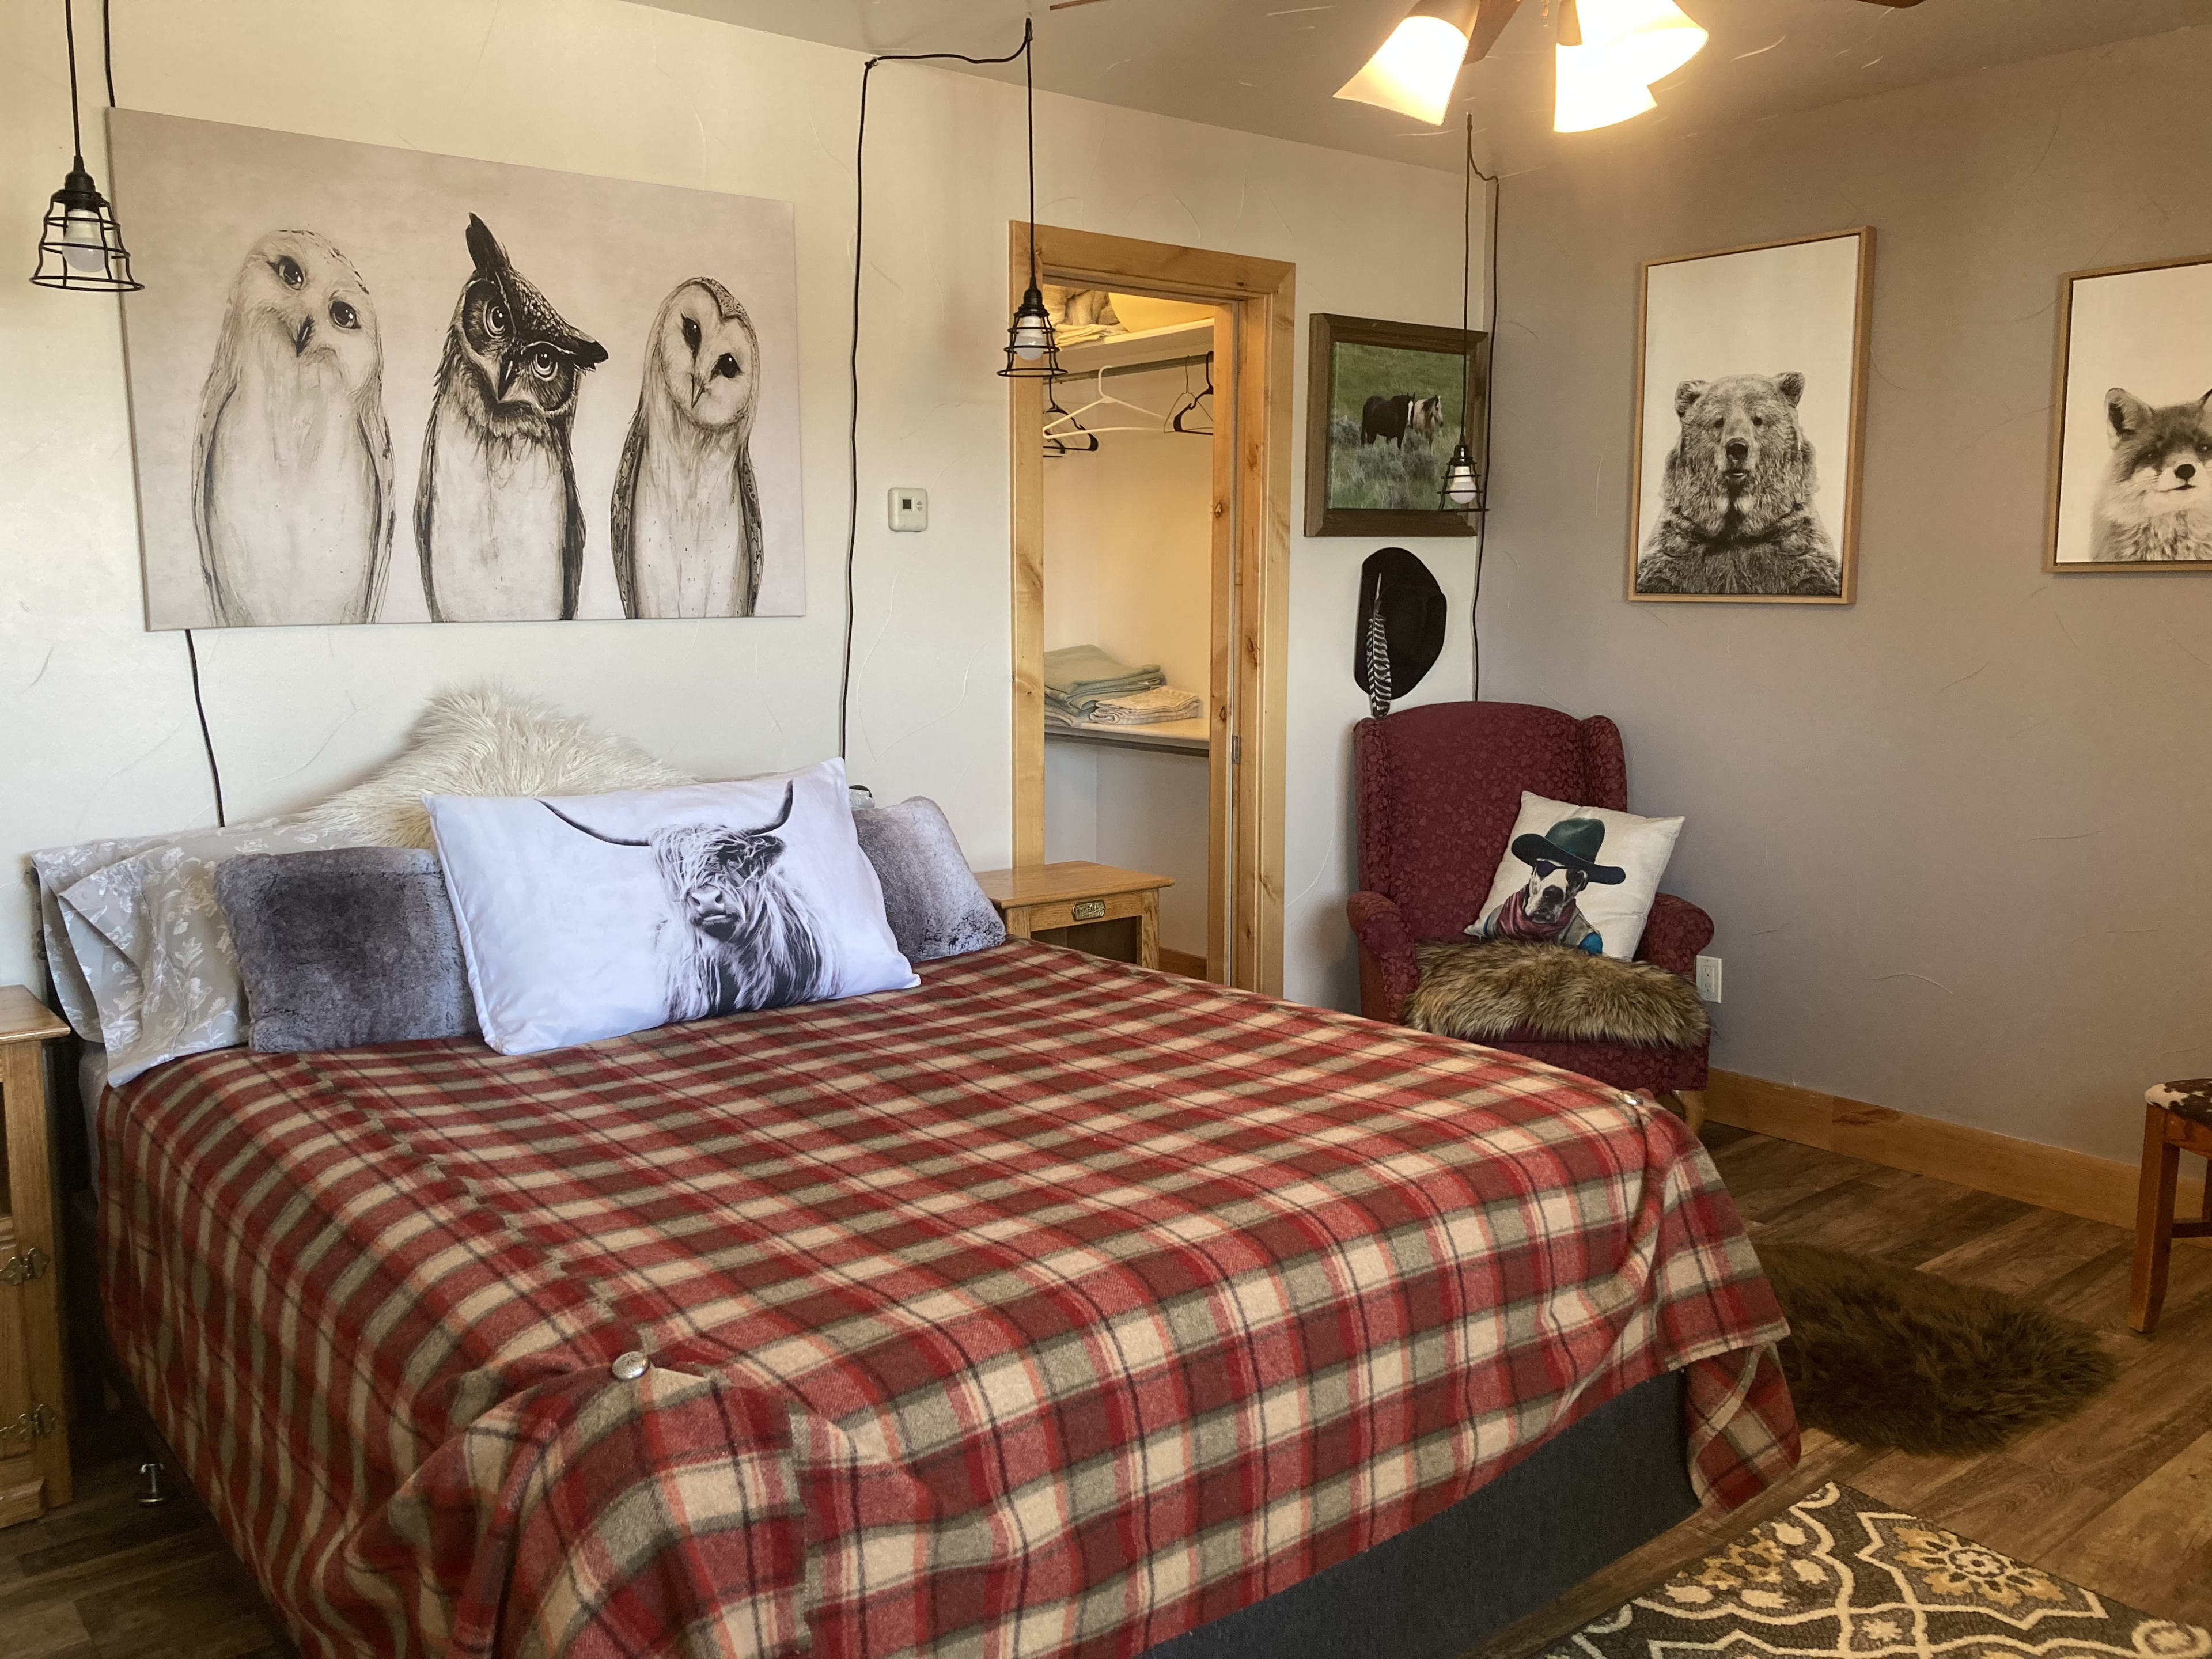 The Williams Peak bedroom is whimsically decorated with animal theme